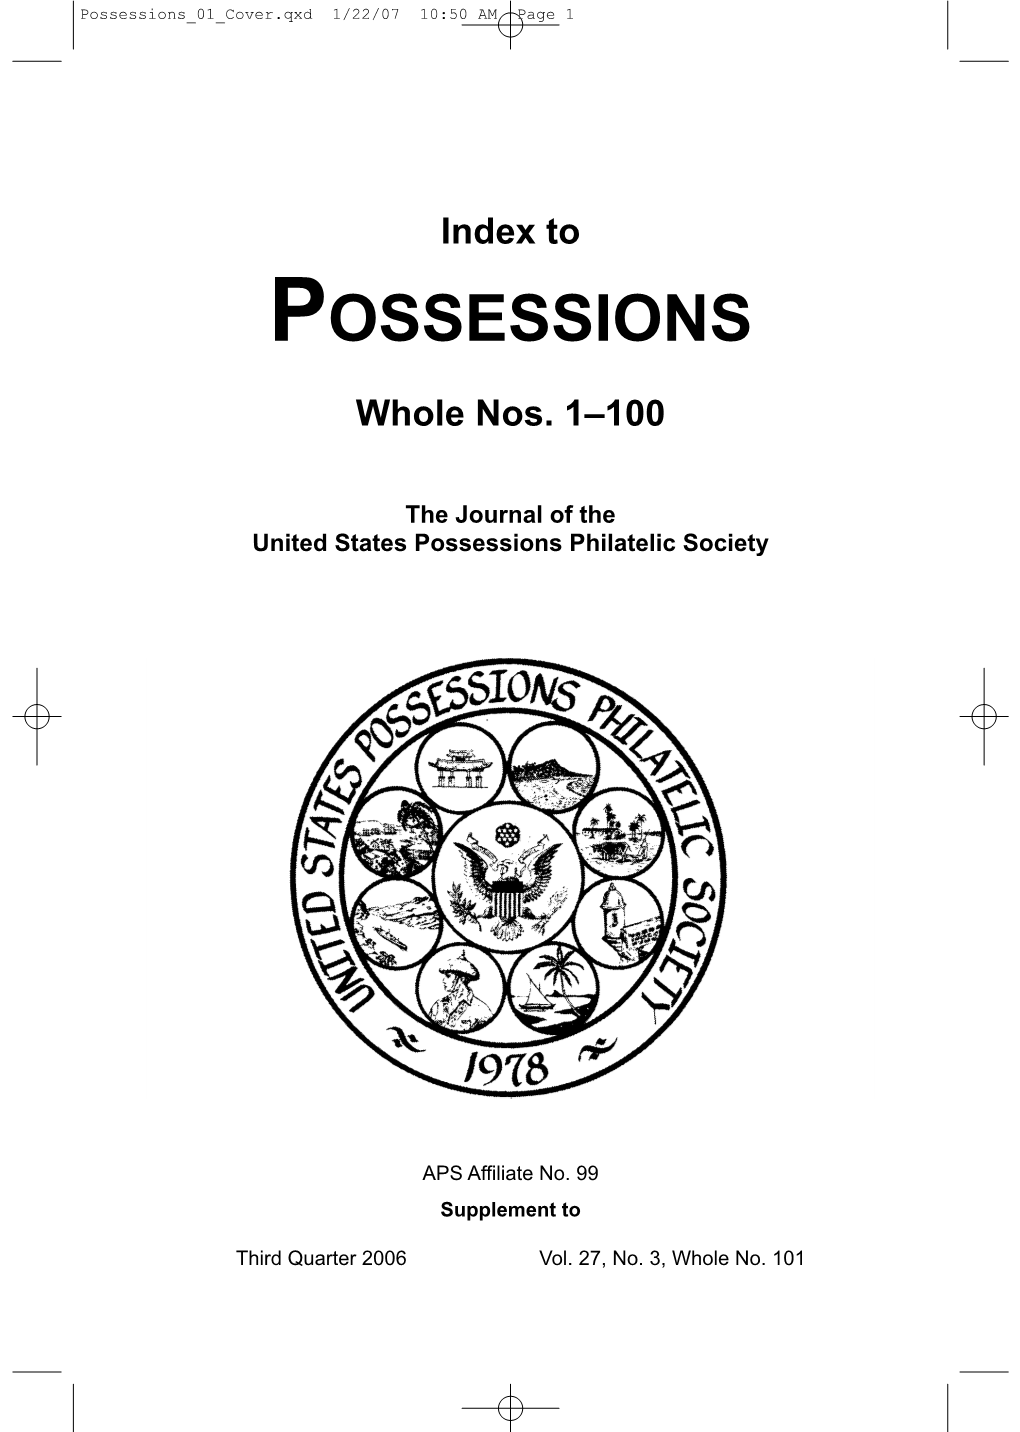 The Index to Possessions, 1978-2020